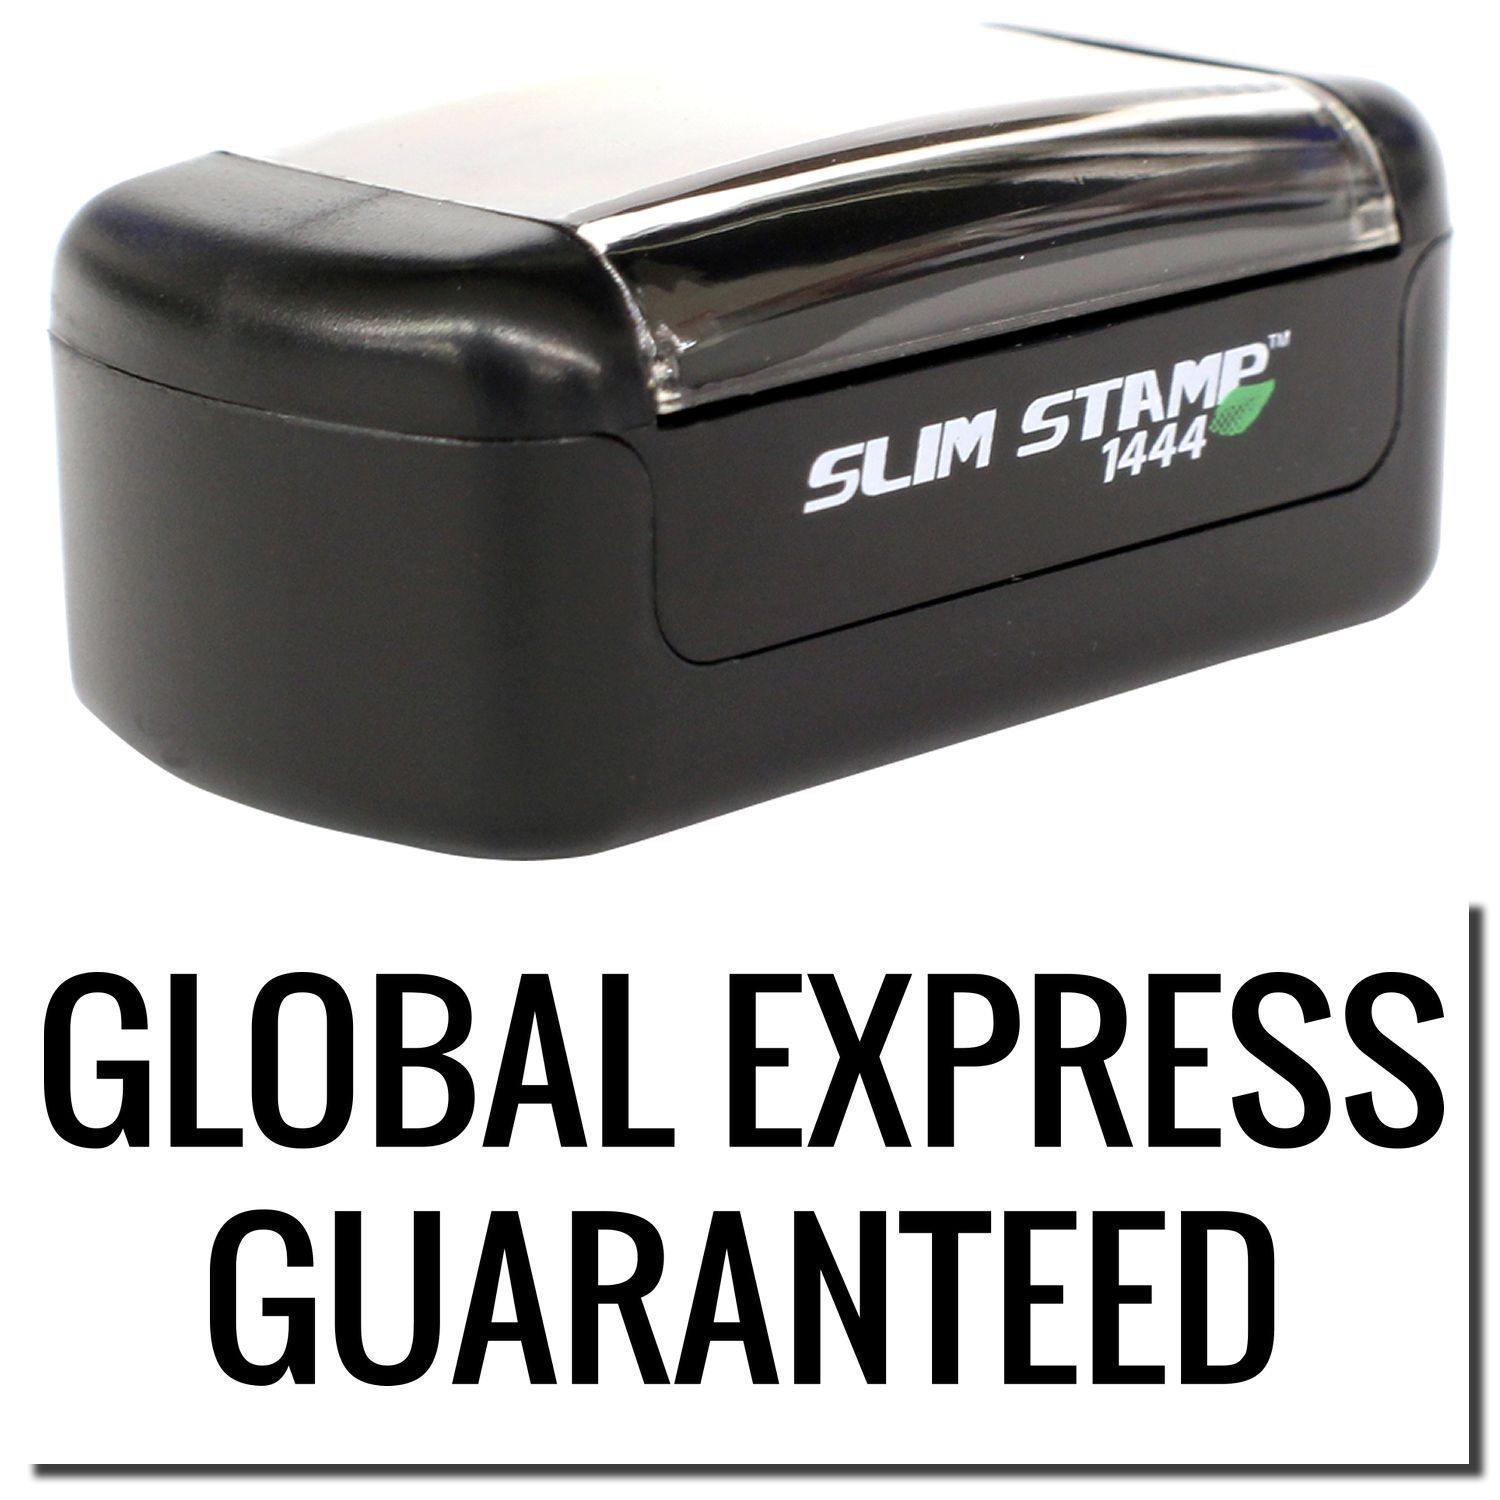 A stock office pre-inked stamp with a stamped image showing how the text "GLOBAL EXPRESS GUARANTEED" is displayed after stamping.